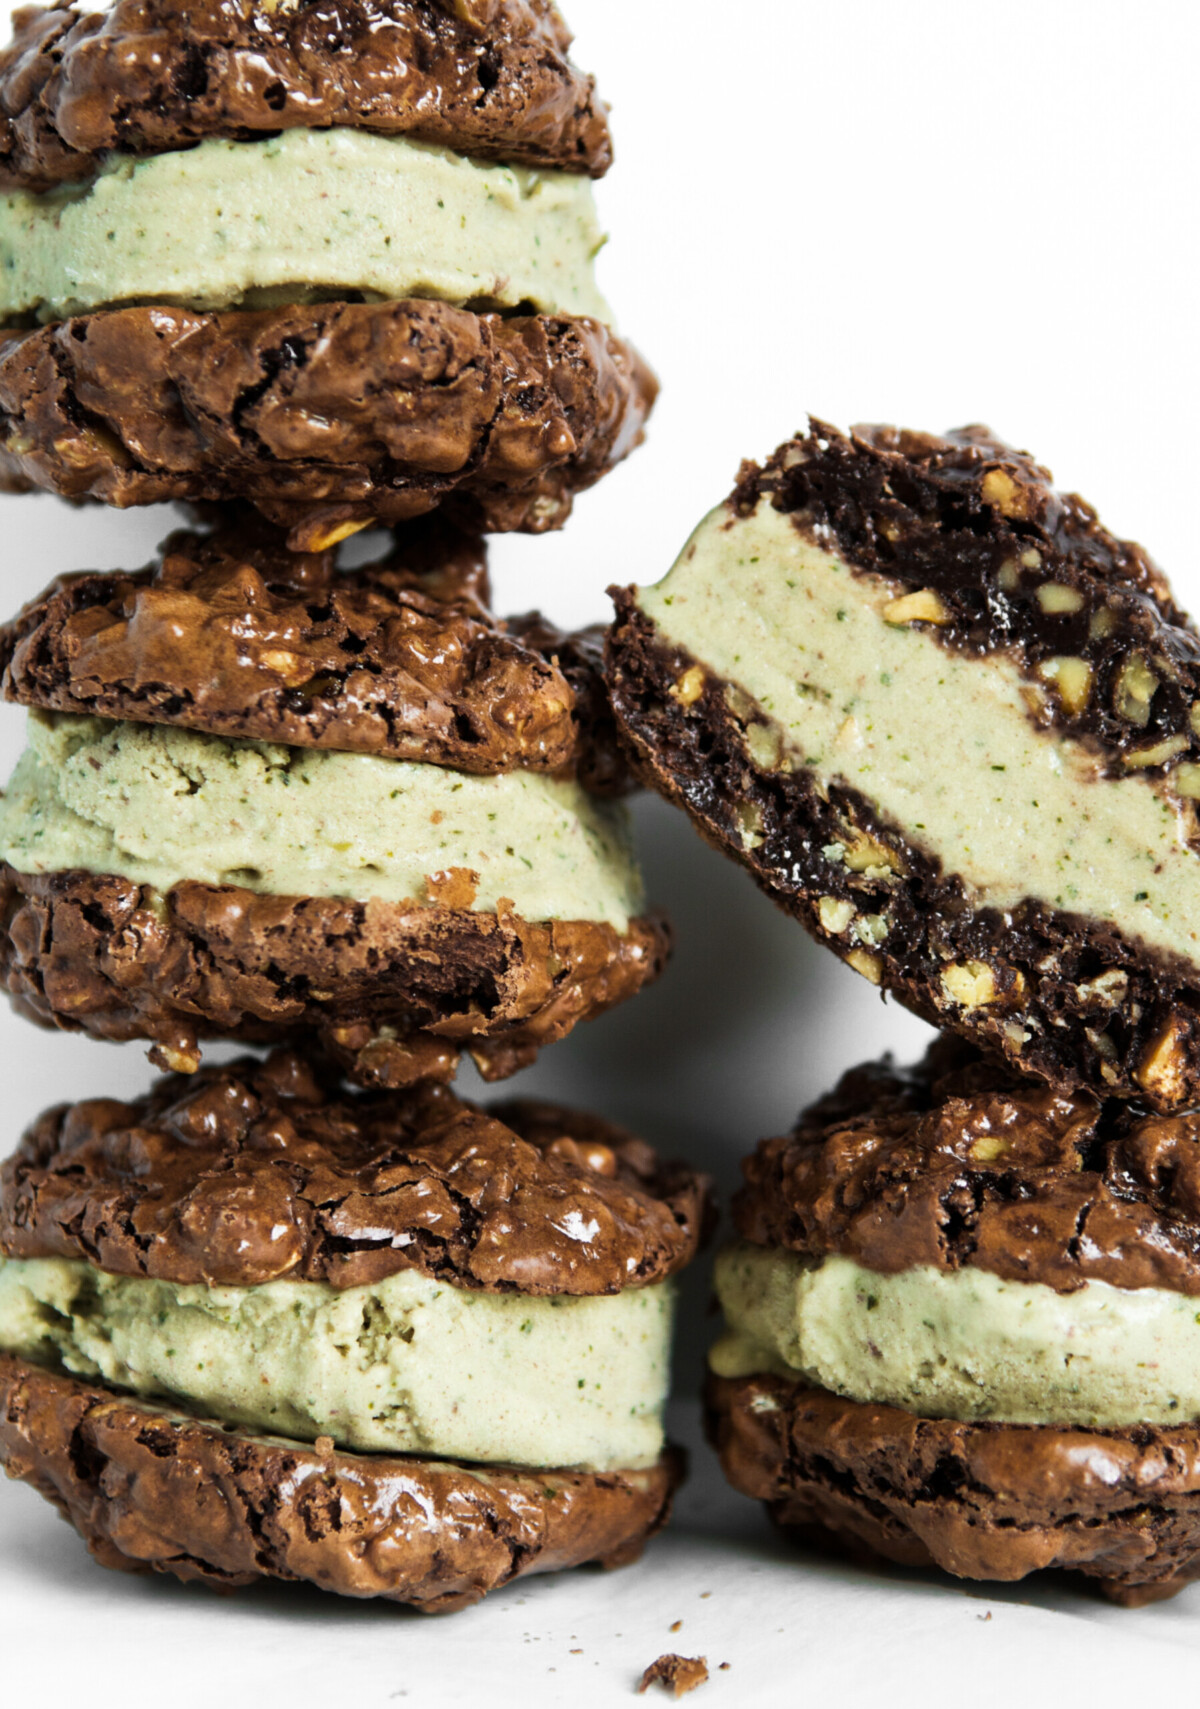 Photograph of gluten free ice cream sandwiches stacked on top of eachother